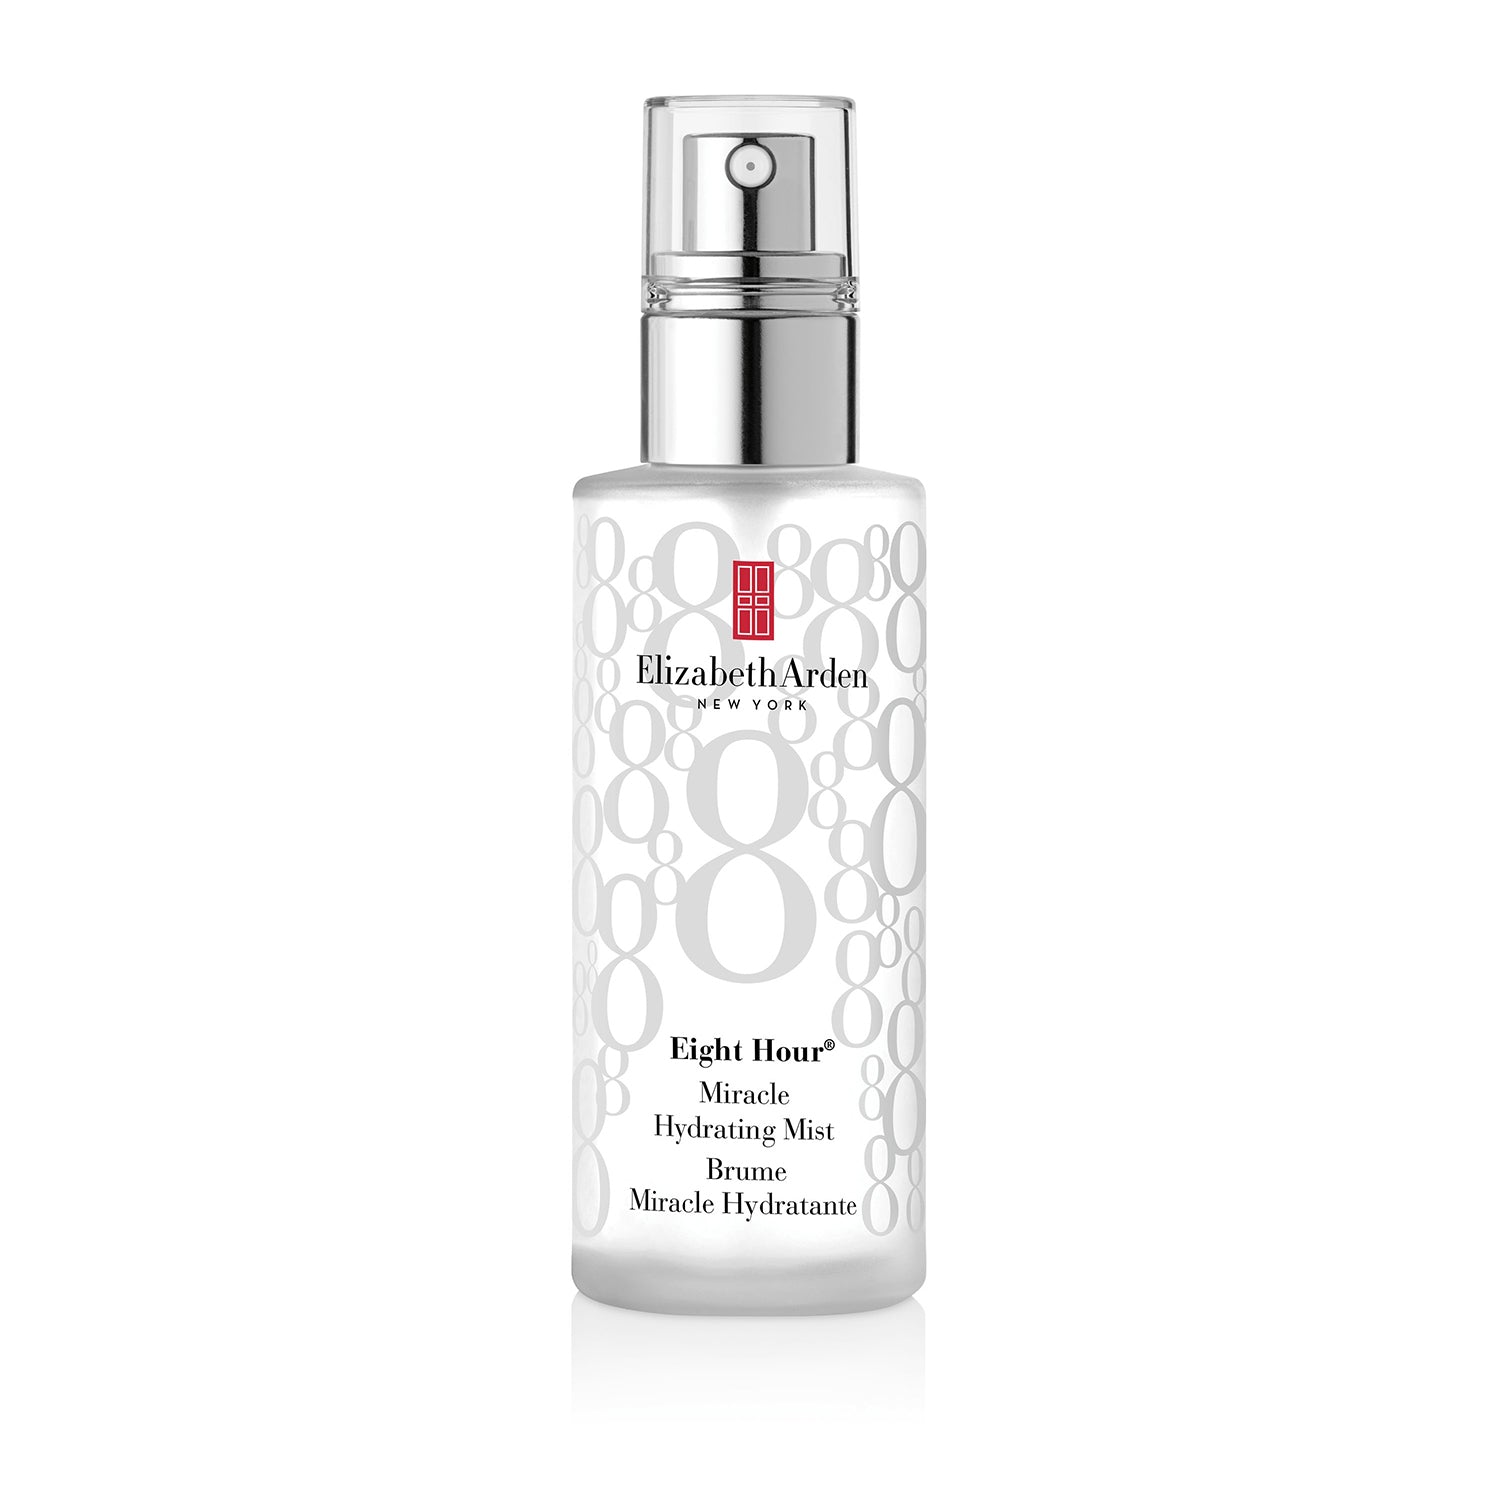 Elizabeth Arden Eight Hour® Miracle Hydrating Mist - 100ml 1 Shaws Department Stores